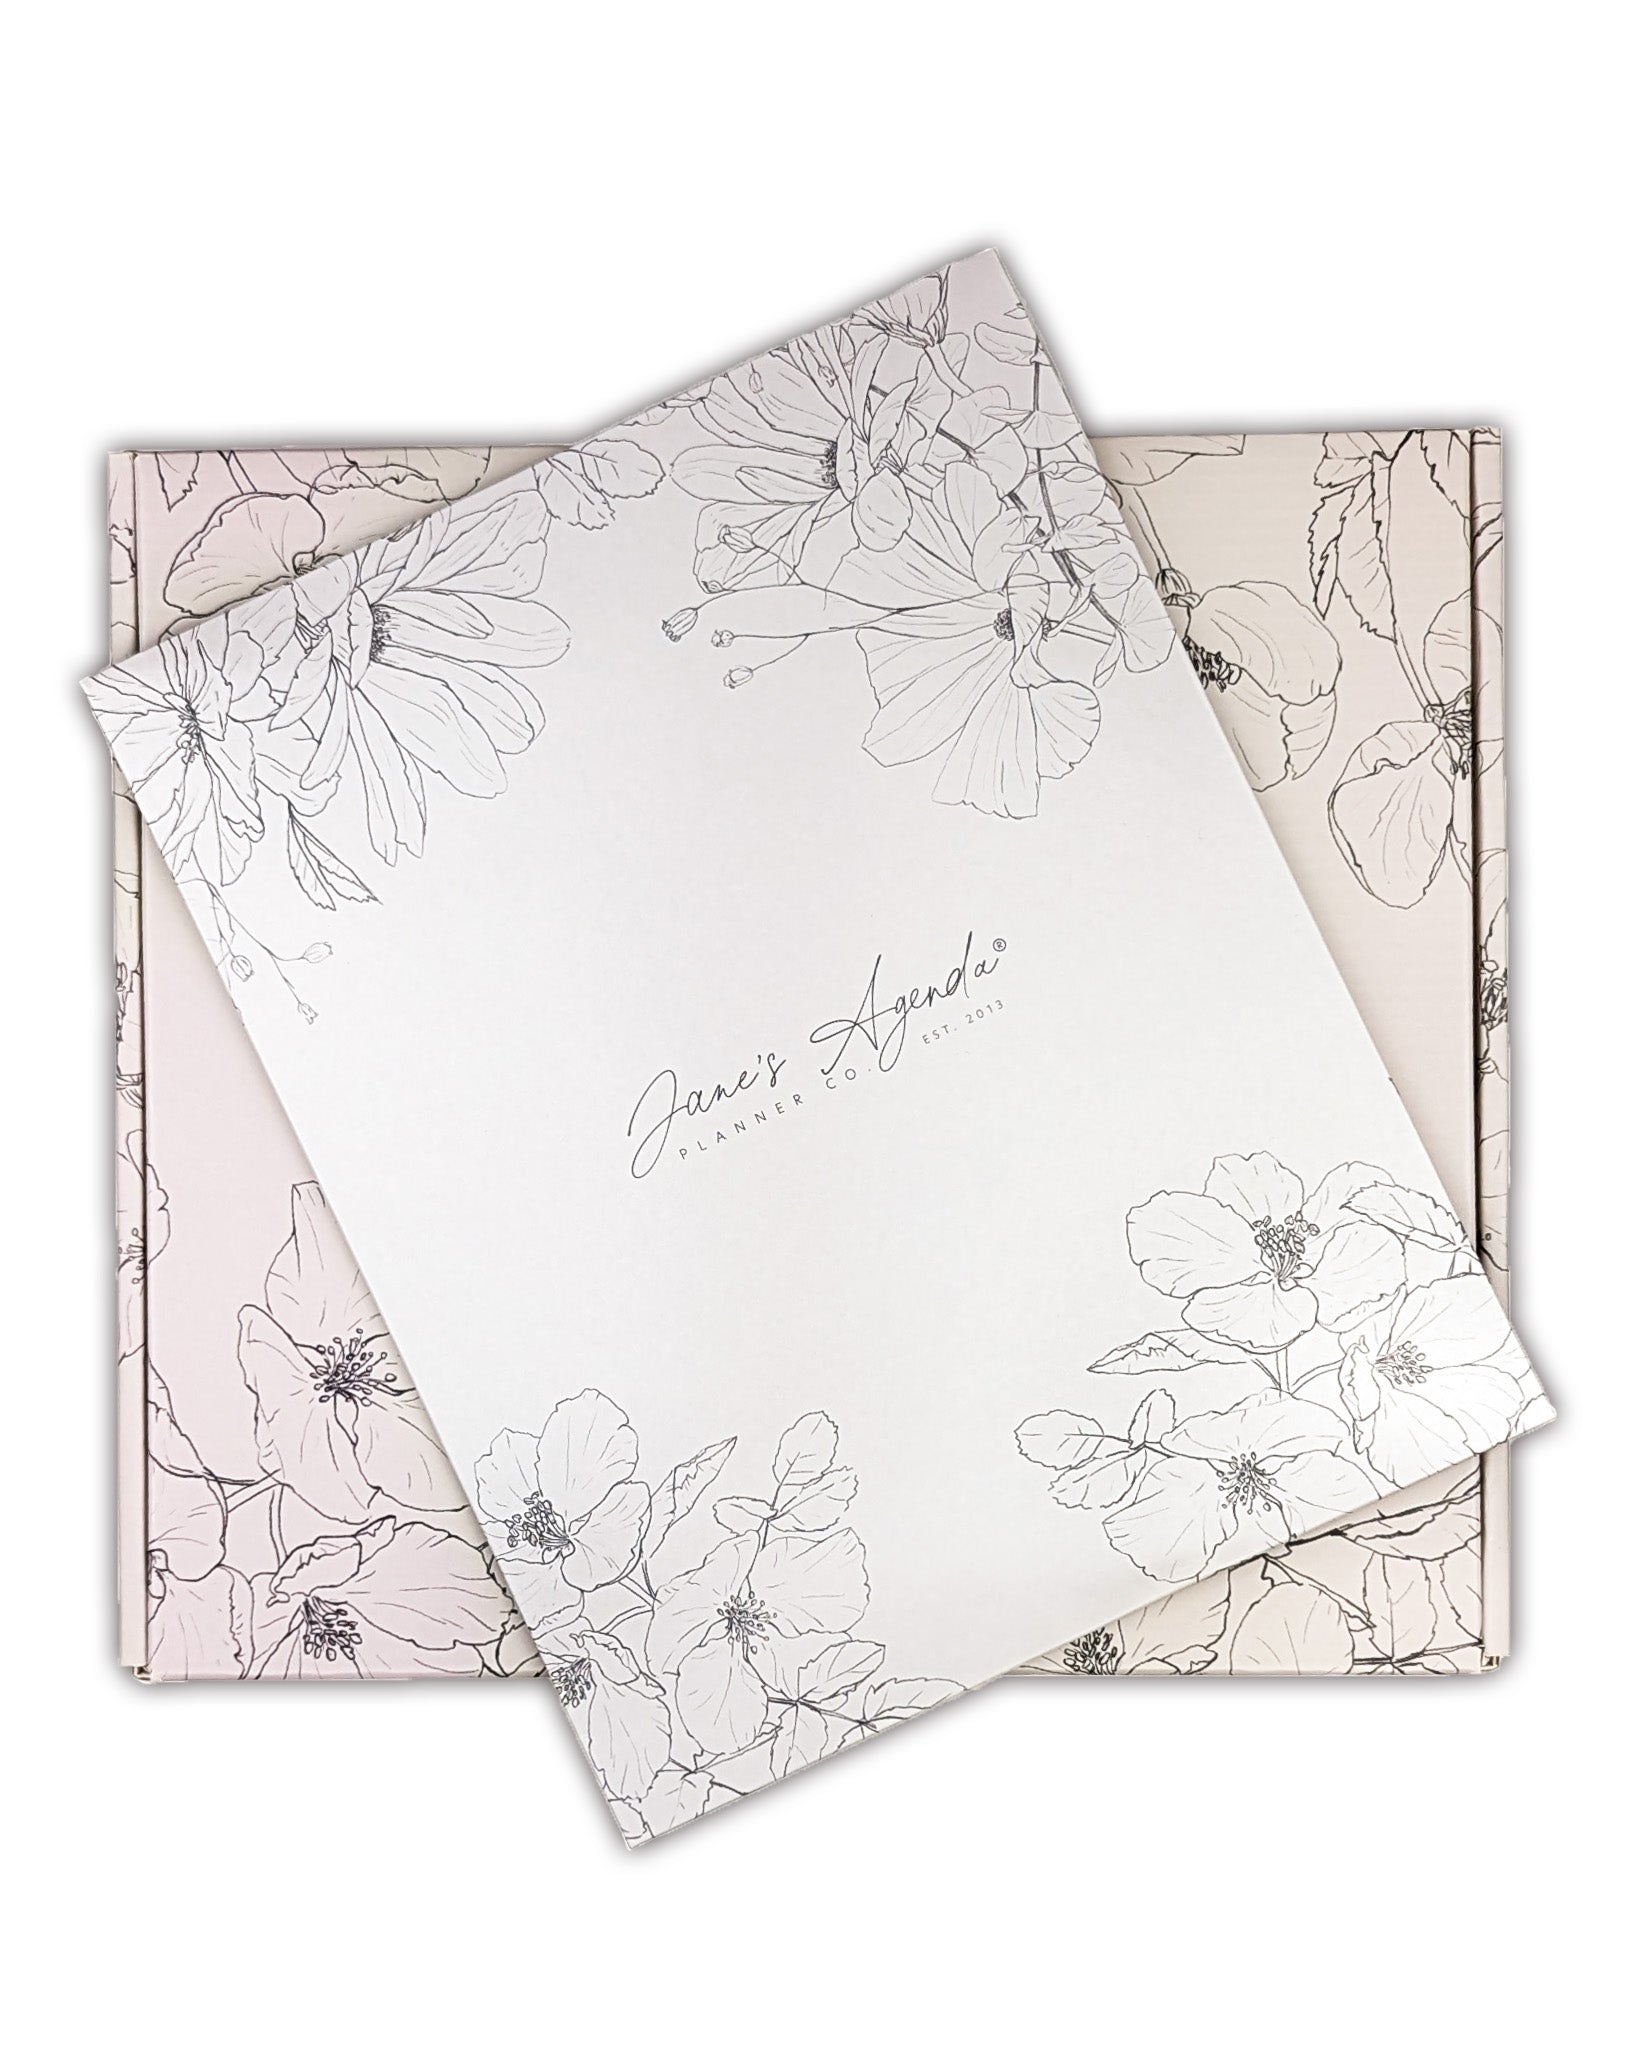 Deluxe Monthly Planner Lifestyle Subscription Box by Jane's Agenda for discbound planners, and A5 size planner binder systems.